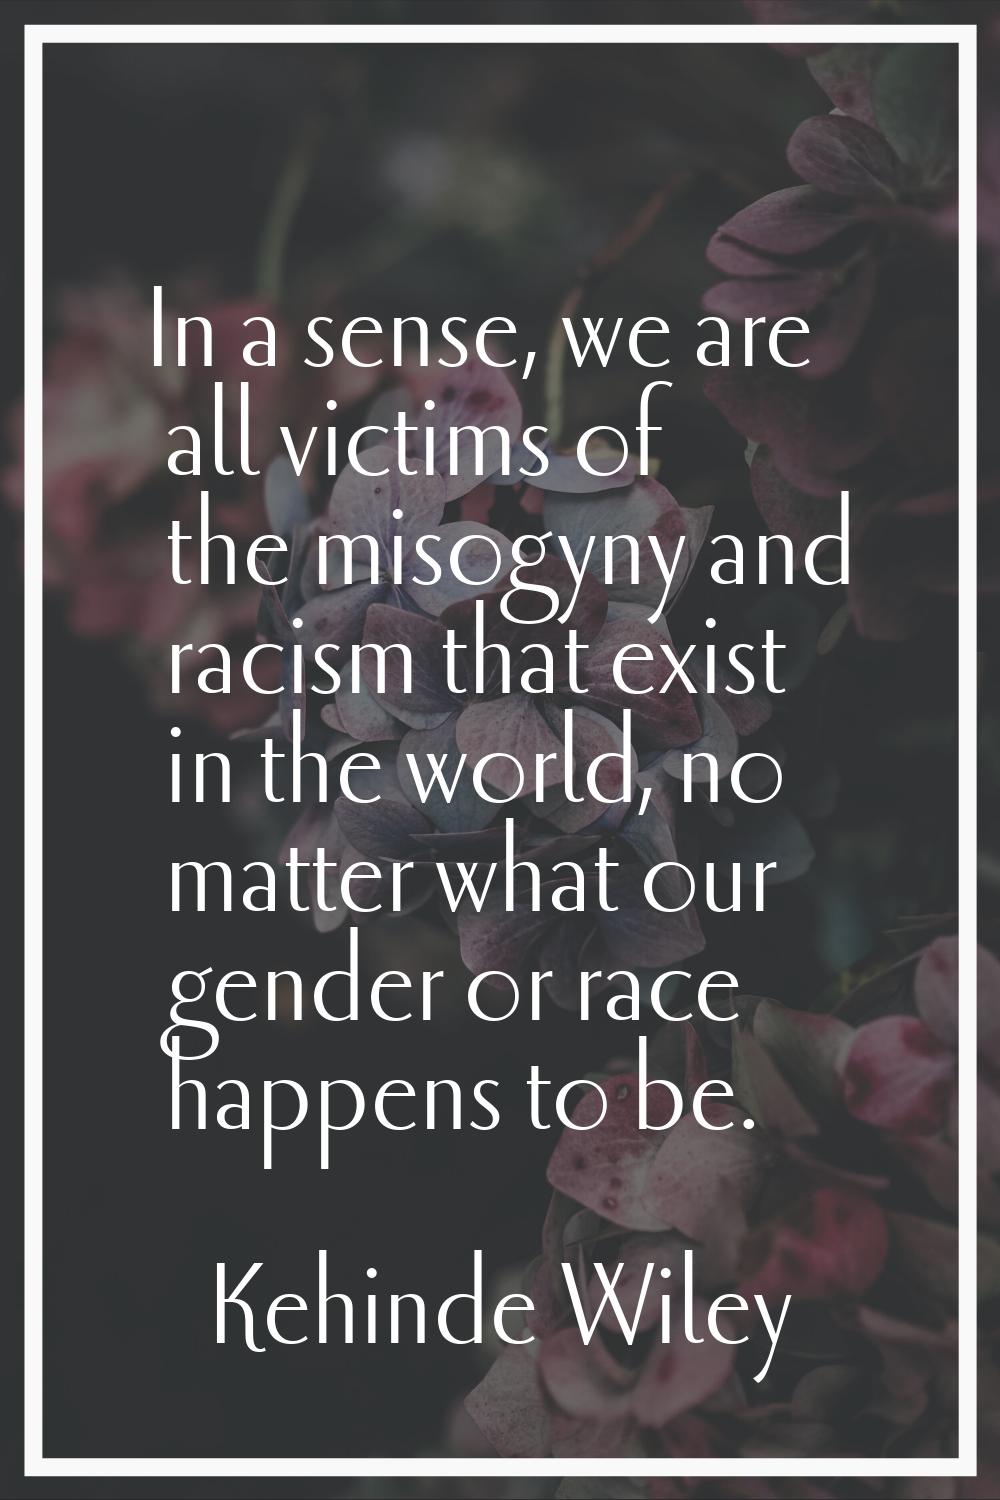 In a sense, we are all victims of the misogyny and racism that exist in the world, no matter what o